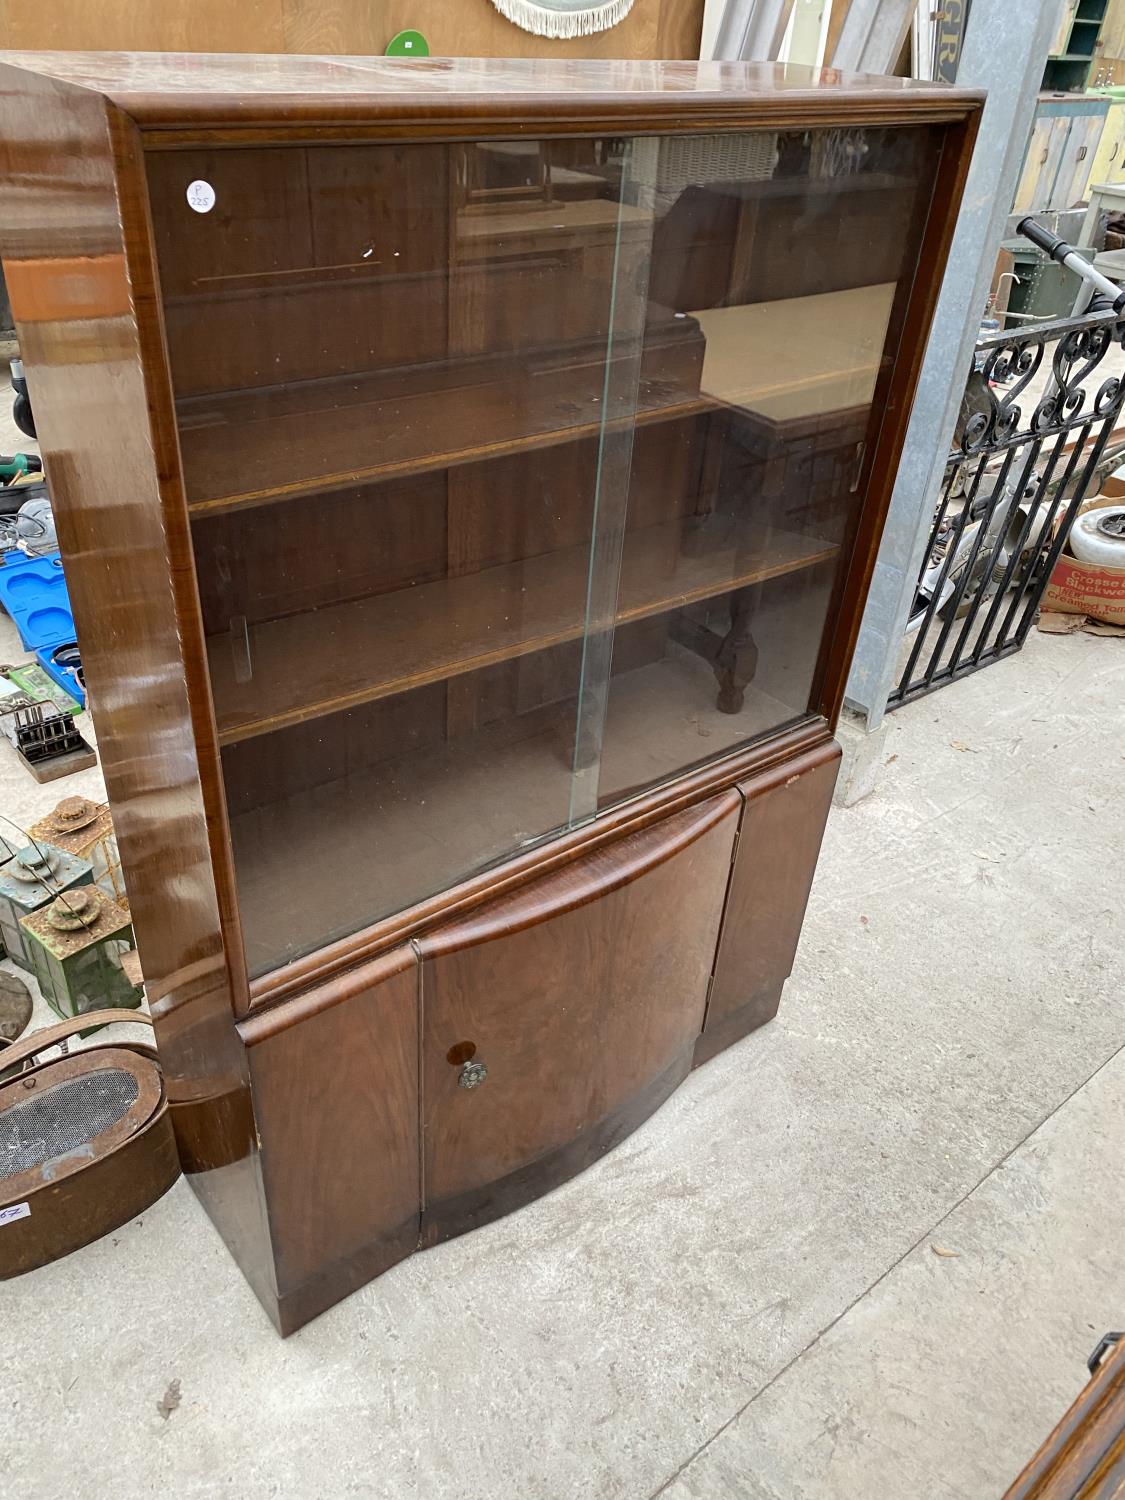 A MAHOGANY CABINET WITH LOWER DOOR AND TWO SLIDING GLASS DOORS